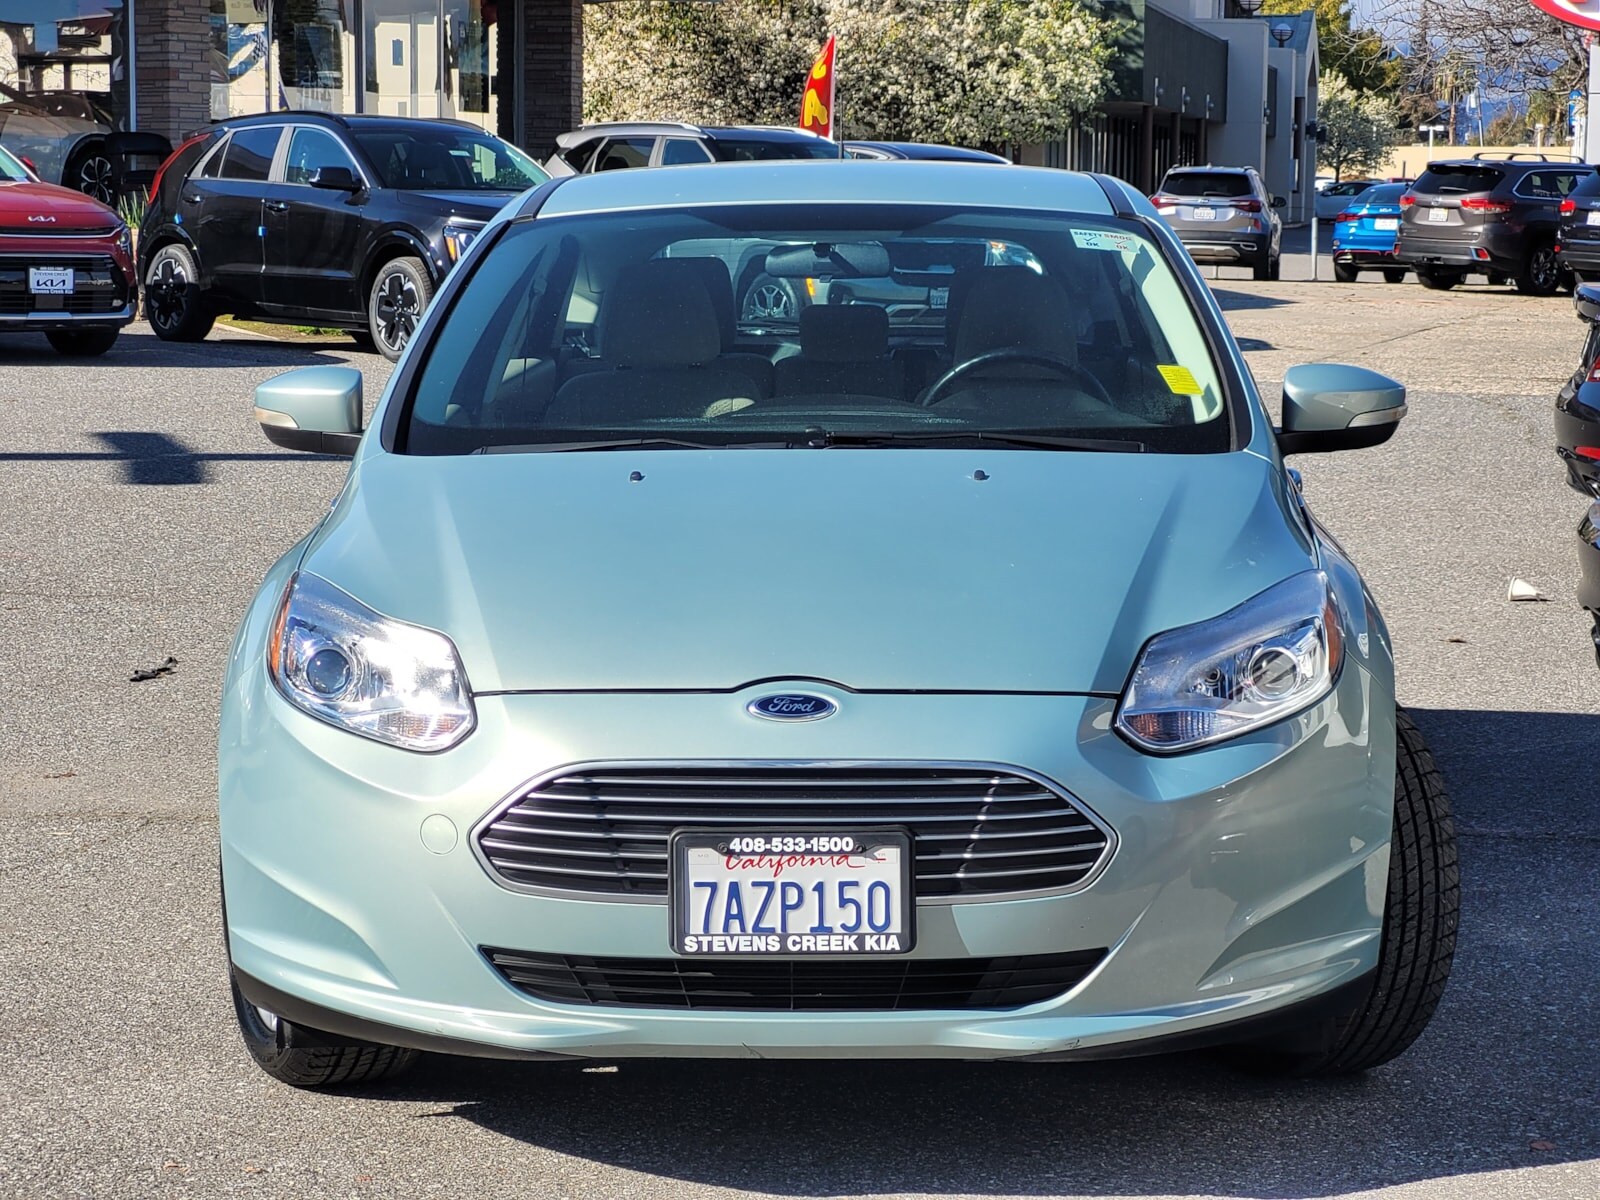 Used 2013 Ford Focus Electric with VIN 1FADP3R46DL325122 for sale in San Jose, CA